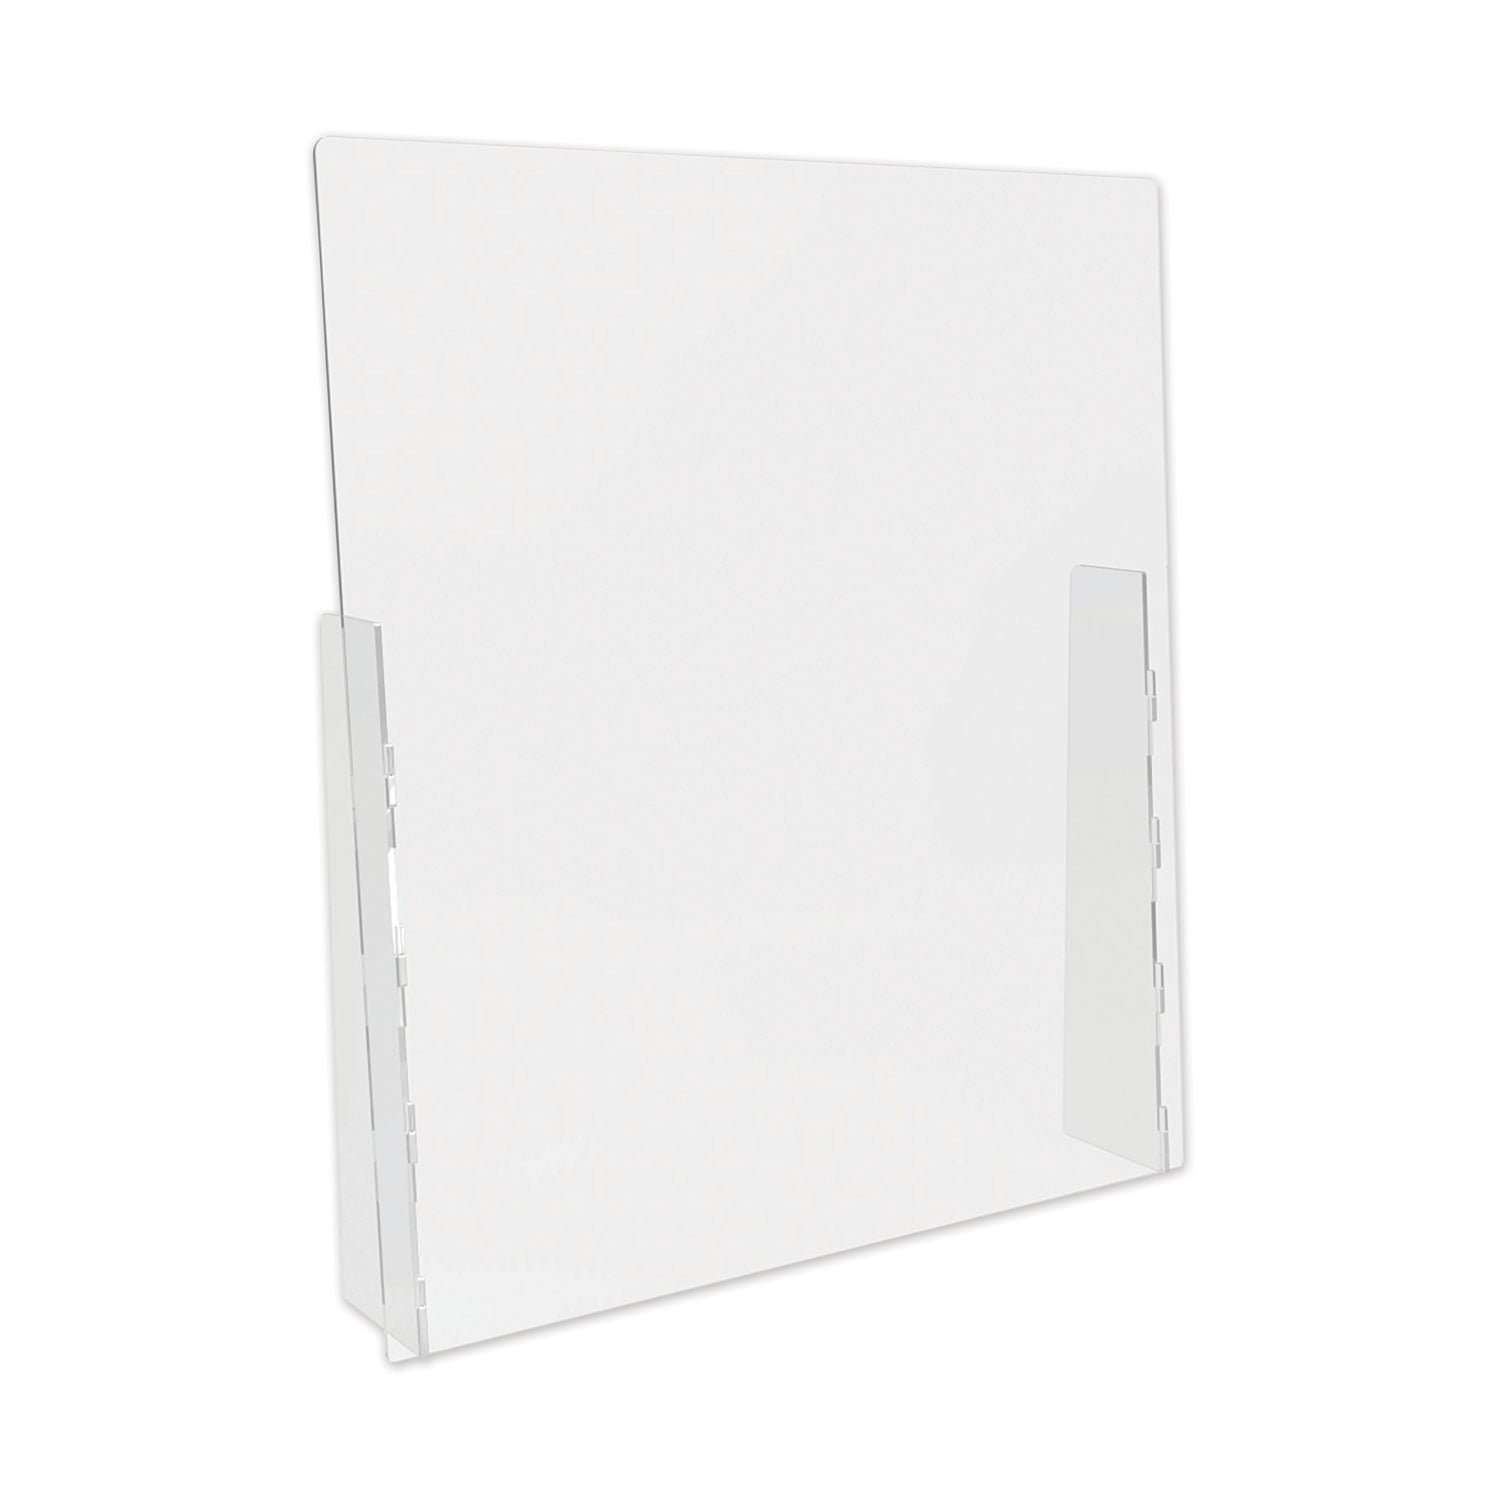 counter-top-barrier-with-full-shield-3175-x-6-x-36-polycarbonate-clear-2-carton_defpbctpc3136f - 1